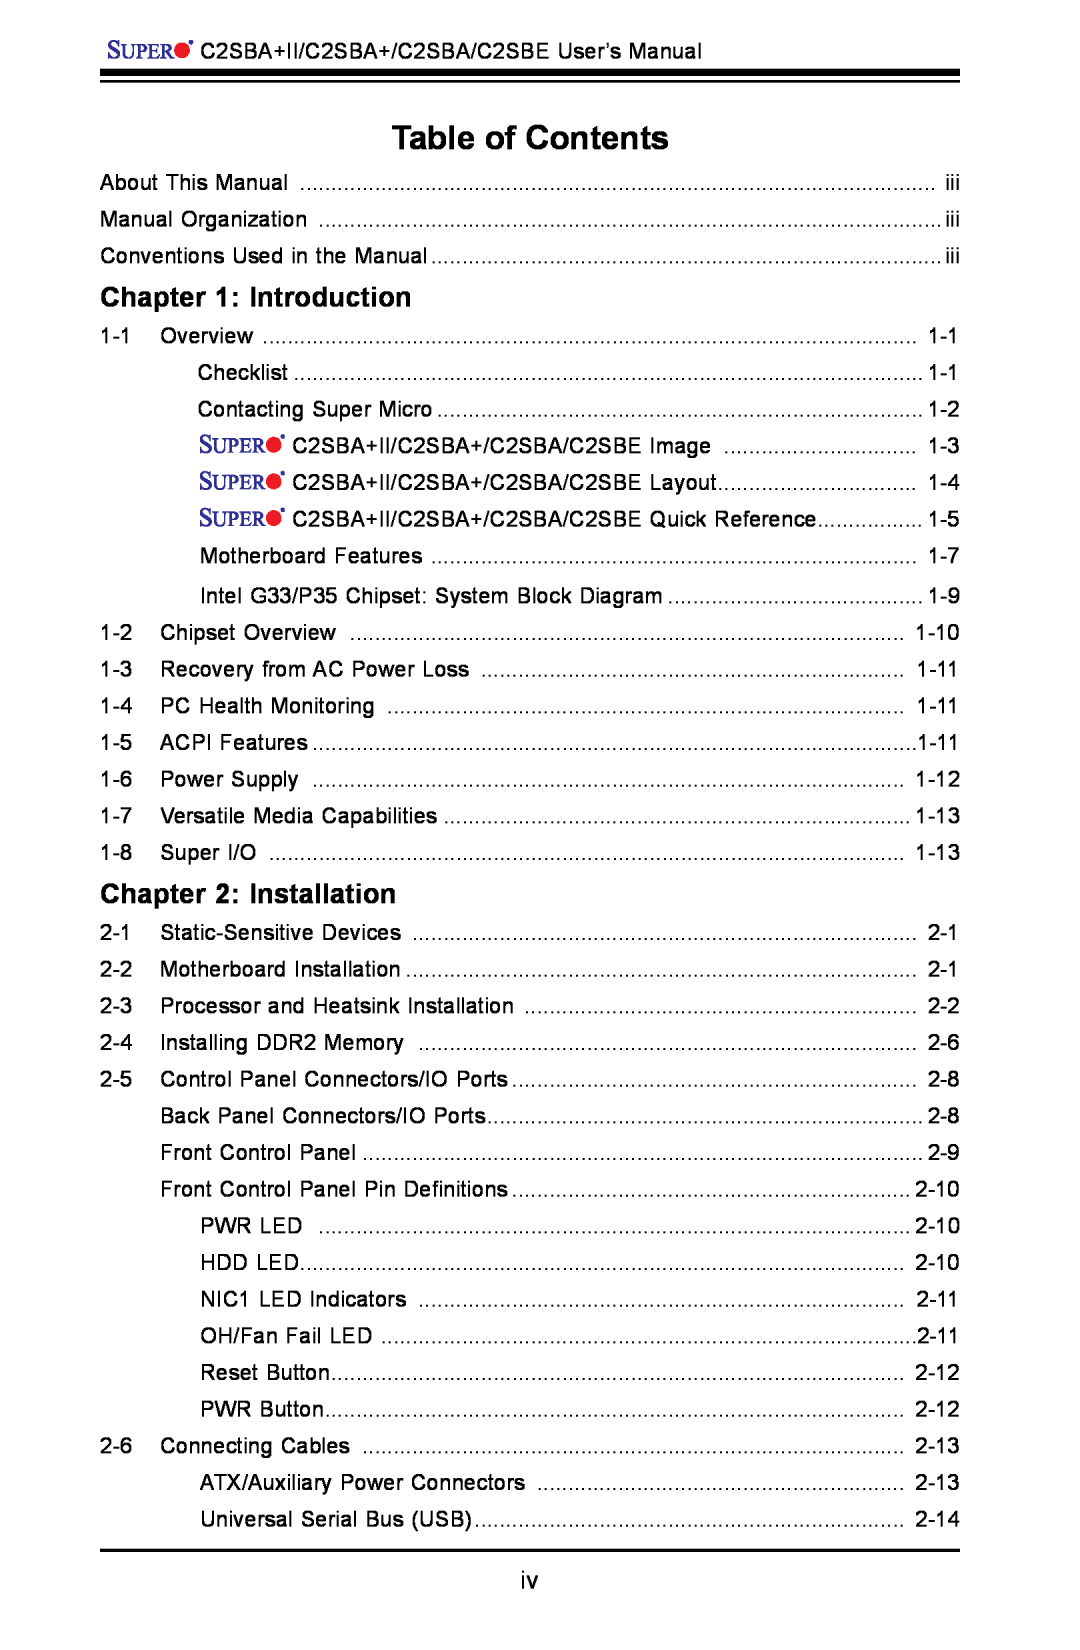 SUPER MICRO Computer C2SBA+II, C2SBE user manual Table of Contents, Introduction, Installation 